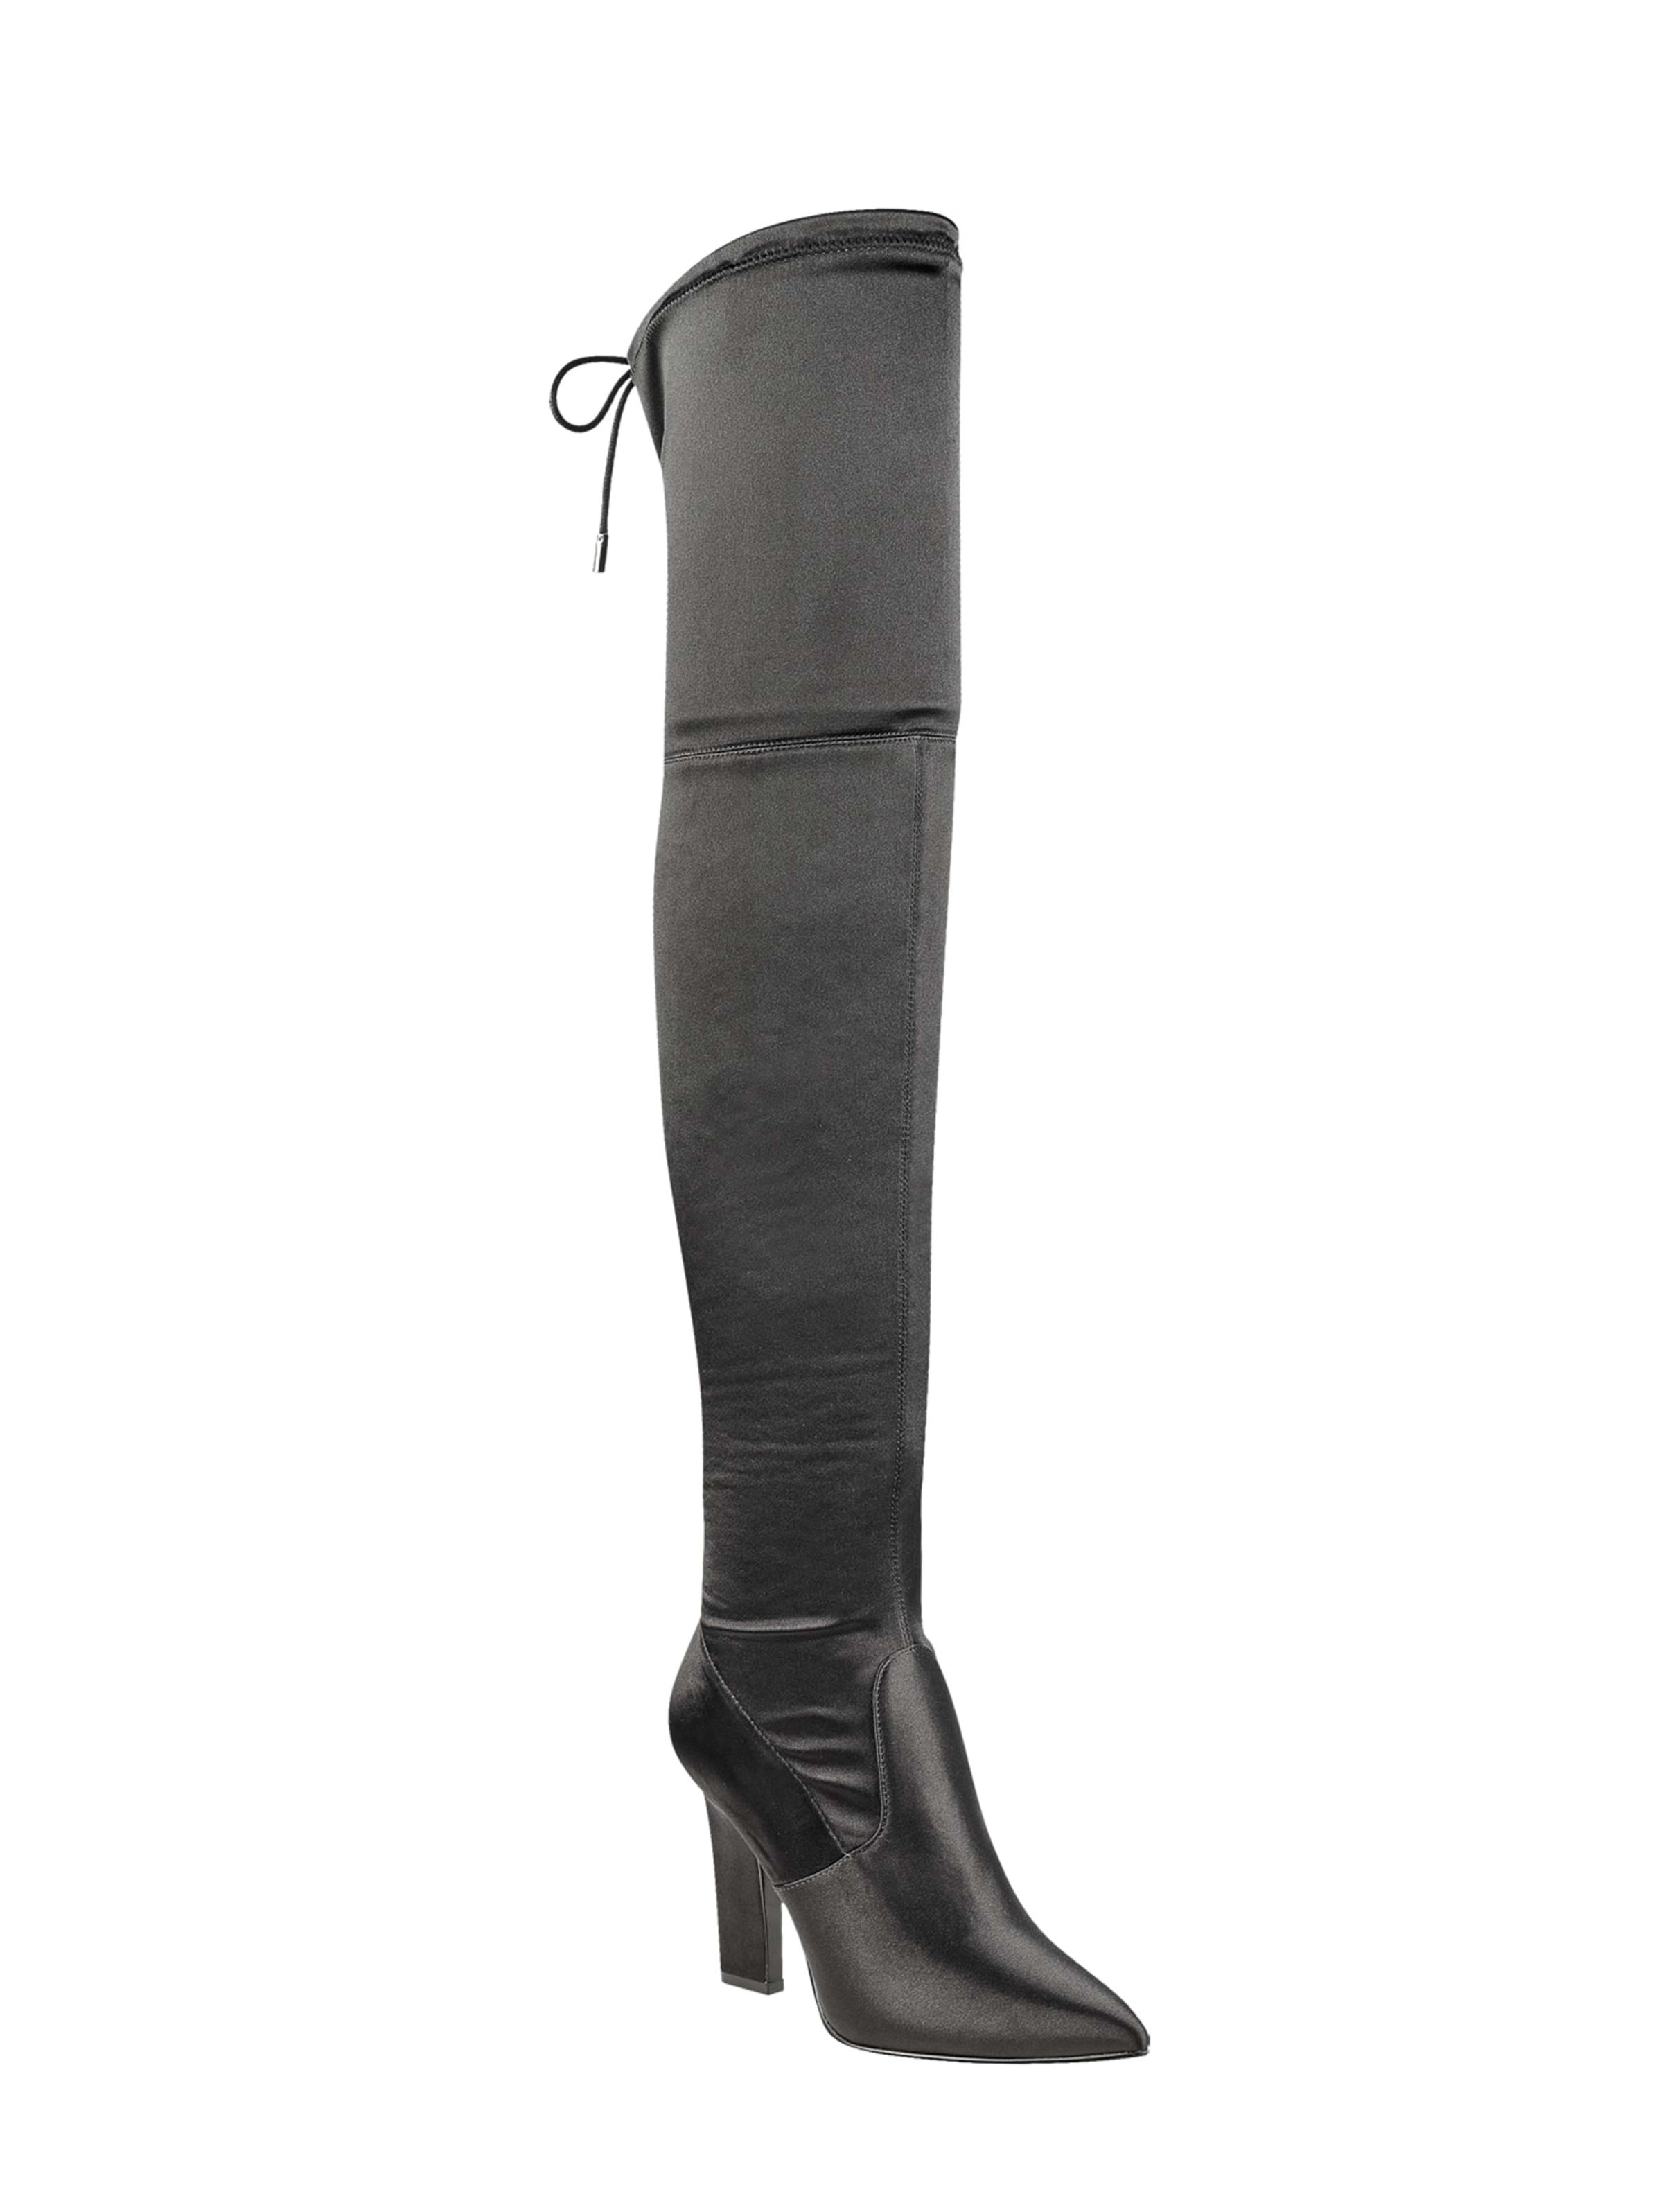 guess over knee boots